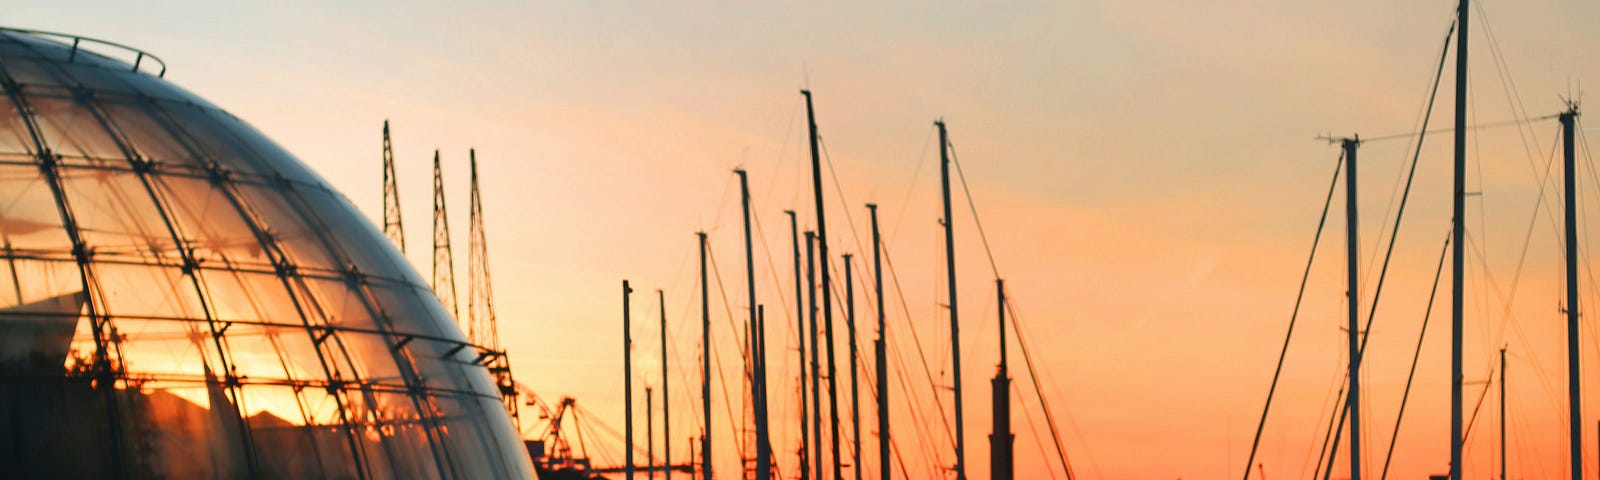 a picture of boats at a marina during sunset- you can see darker shadows in the light